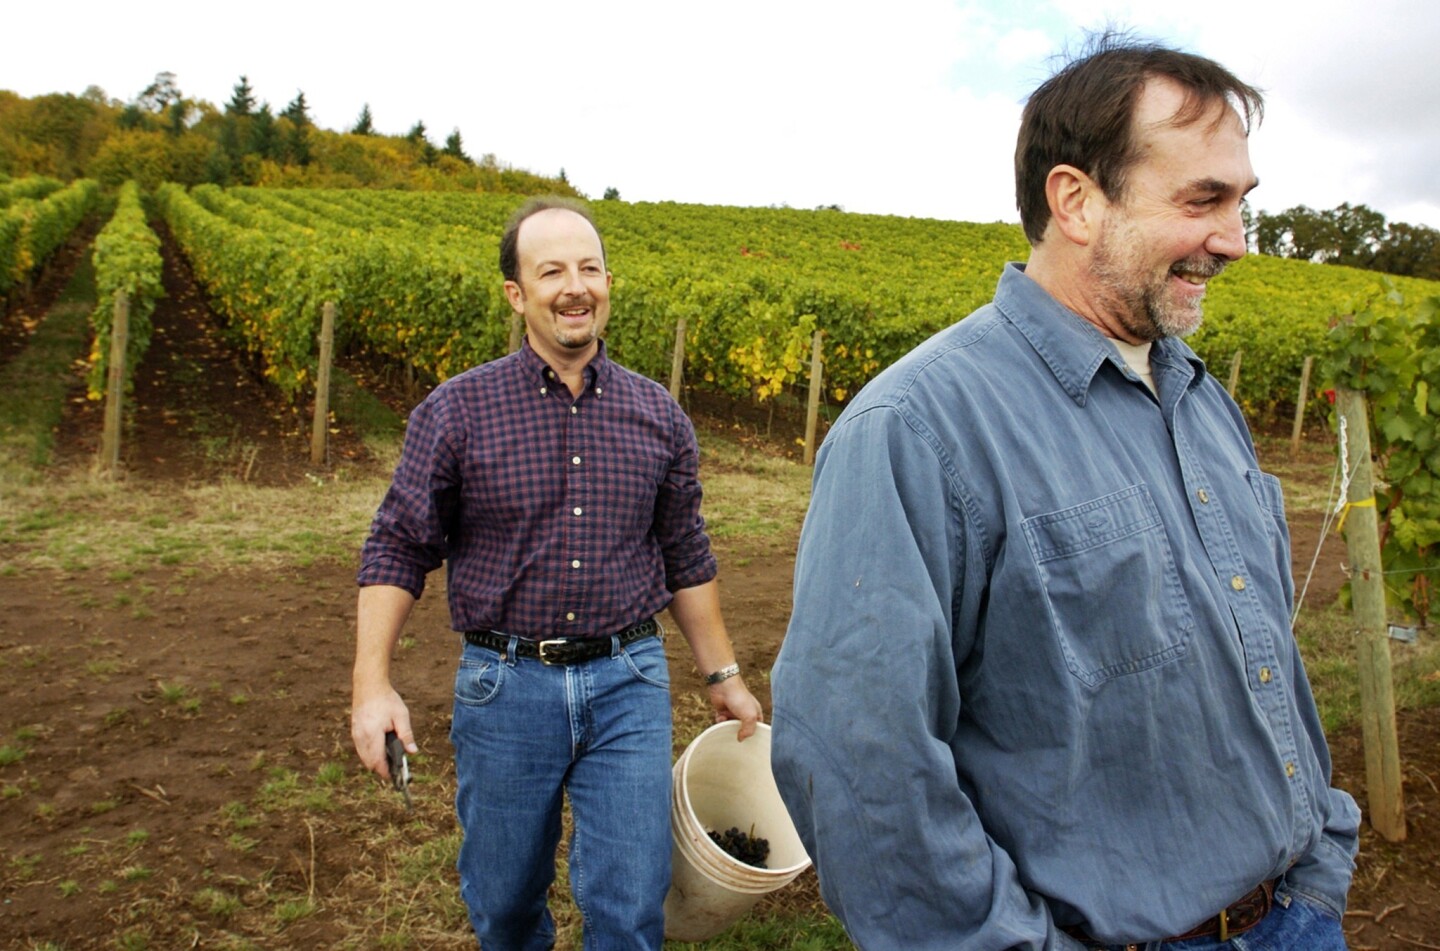 Oregon produced 6.8 million gallons of wine last year. Above, a 2005 file photo of Cristom Vineyards in Salem, Ore.